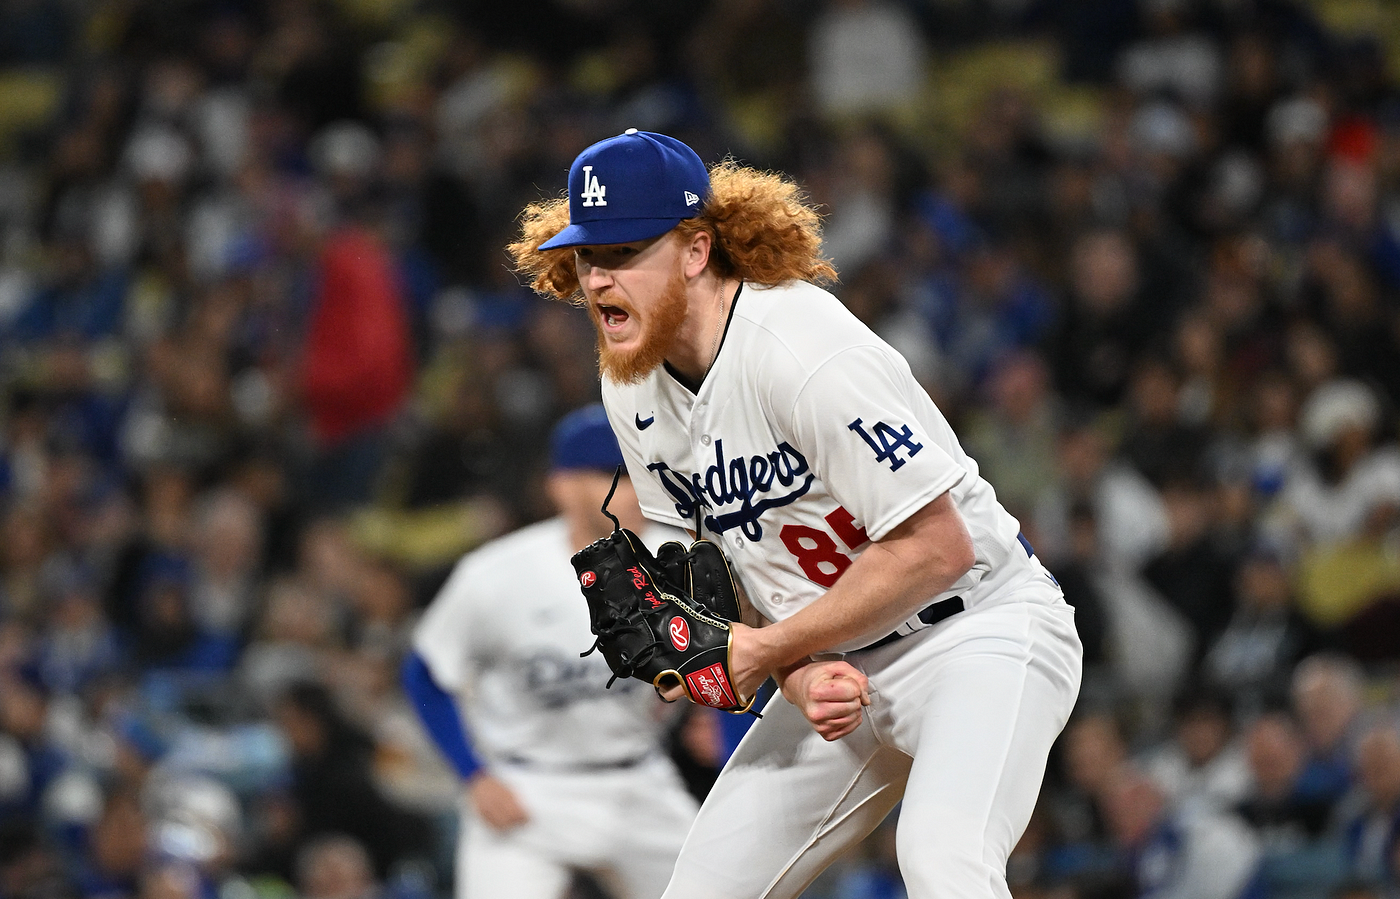 May's superb effort isn't enough to lift Dodgers